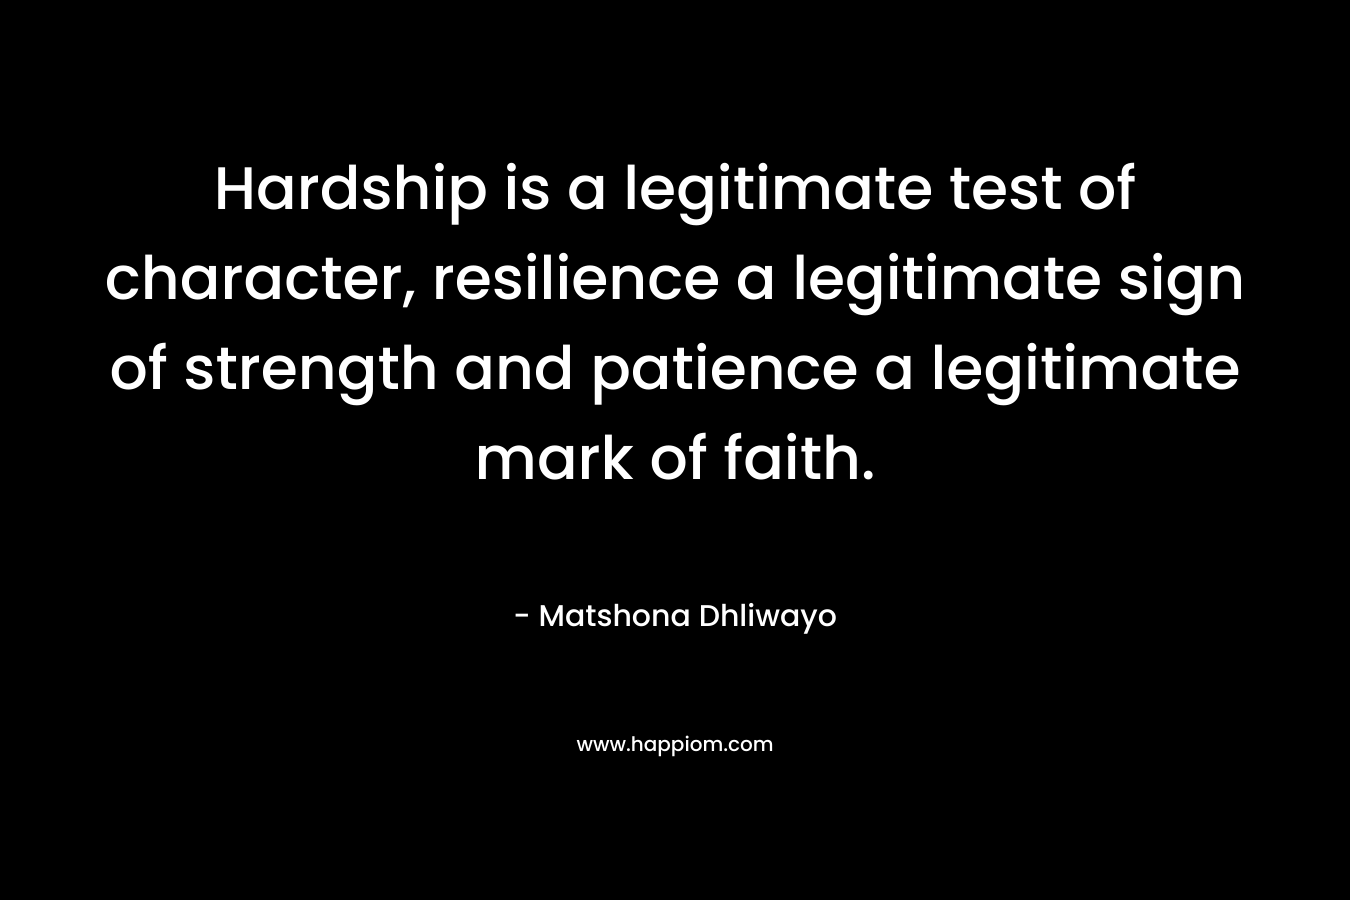 Hardship is a legitimate test of character, resilience a legitimate sign of strength and patience a legitimate mark of faith. – Matshona Dhliwayo